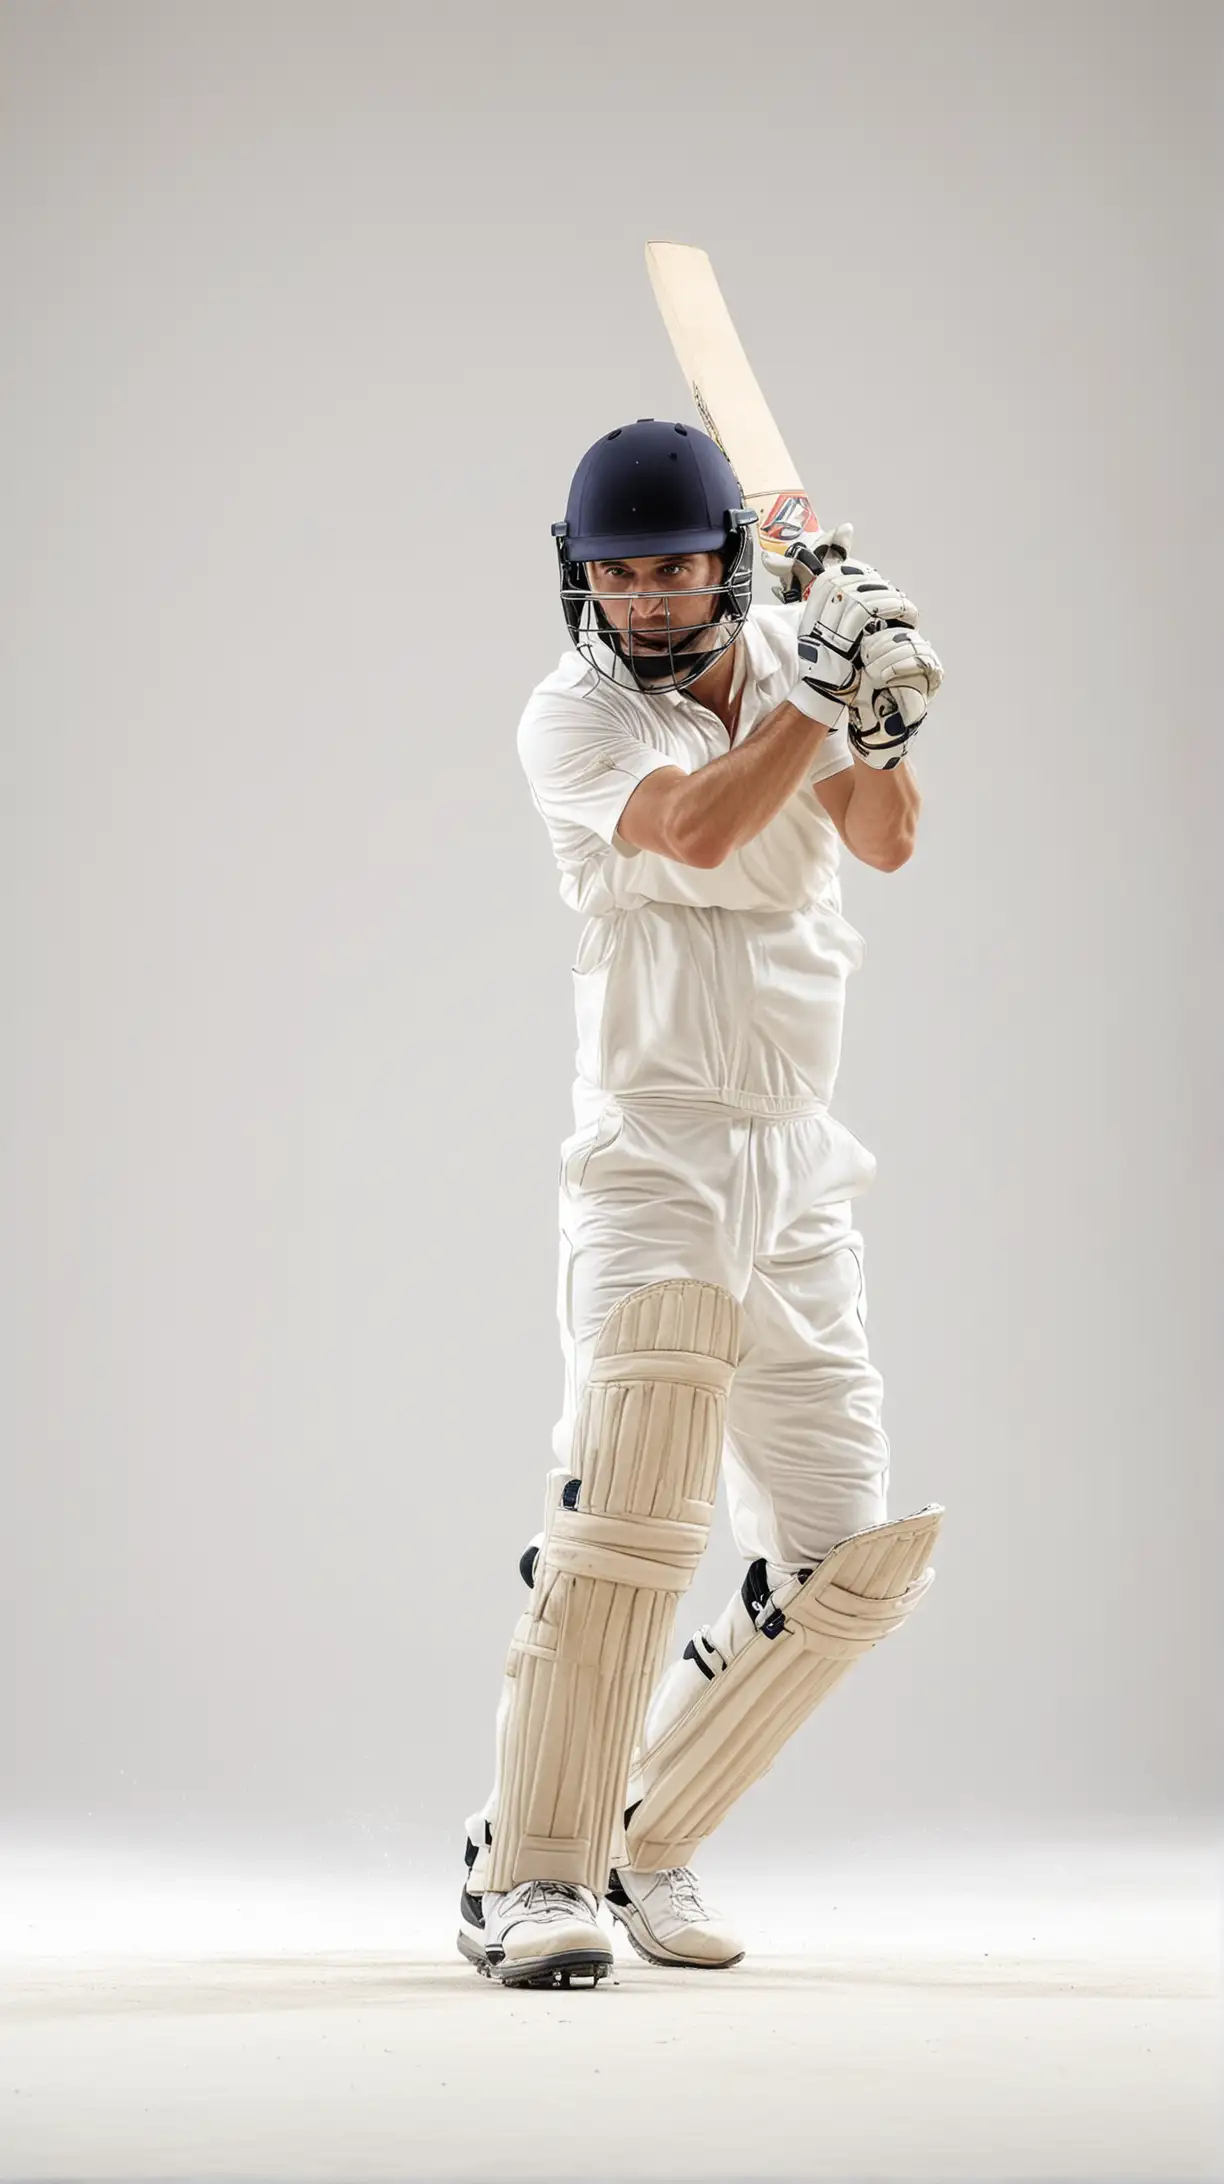 cricket player in action on a solid white background